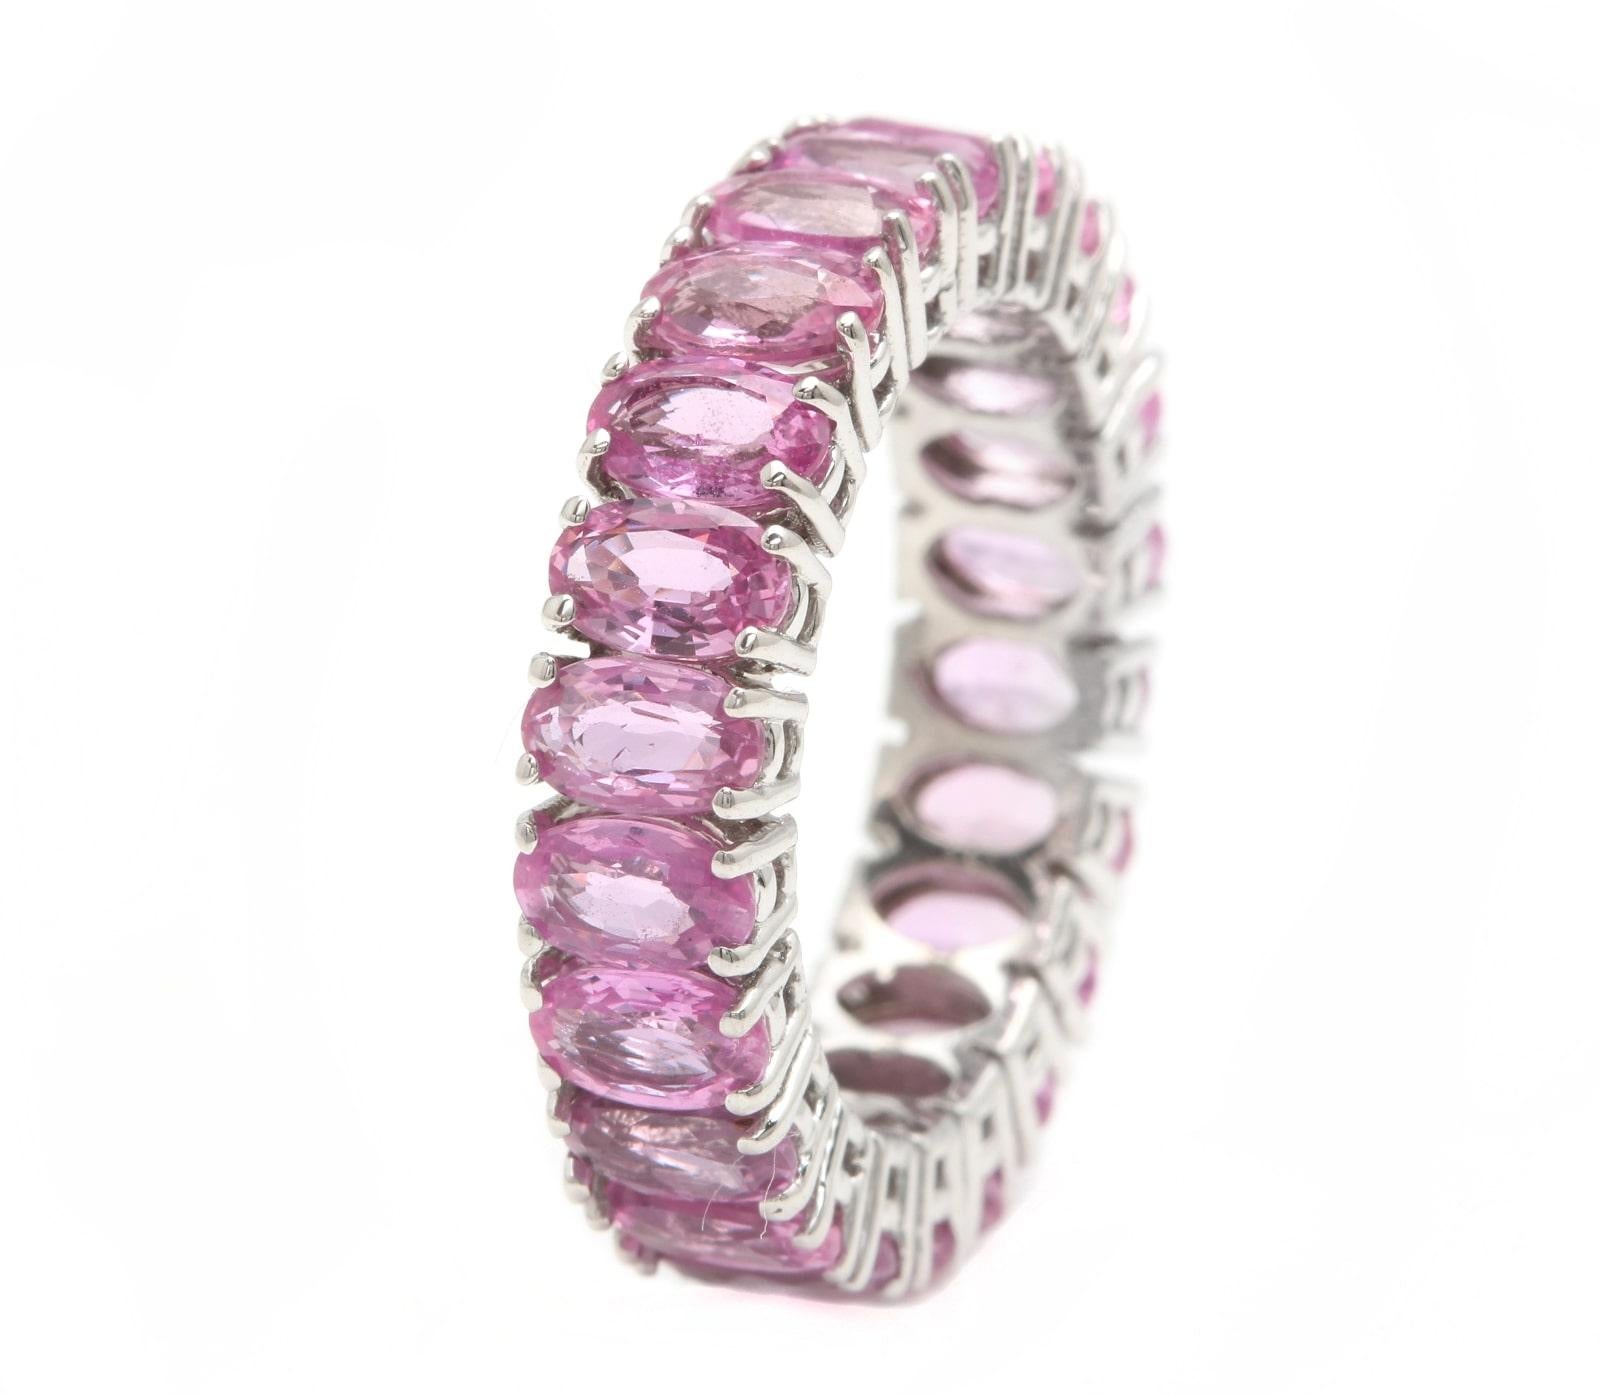 7.00 Carats Exquisite Natural Pink Sapphire 14K Solid White Gold Ring

Suggested Replacement Value $5,000.00

Total Natural Pink Sapphires Weight: Approx. 7.00 Carats (Heated)

Sapphire Measures: Approx. 5.00 x 3.00mm

Ring size: 6.25 

Ring total